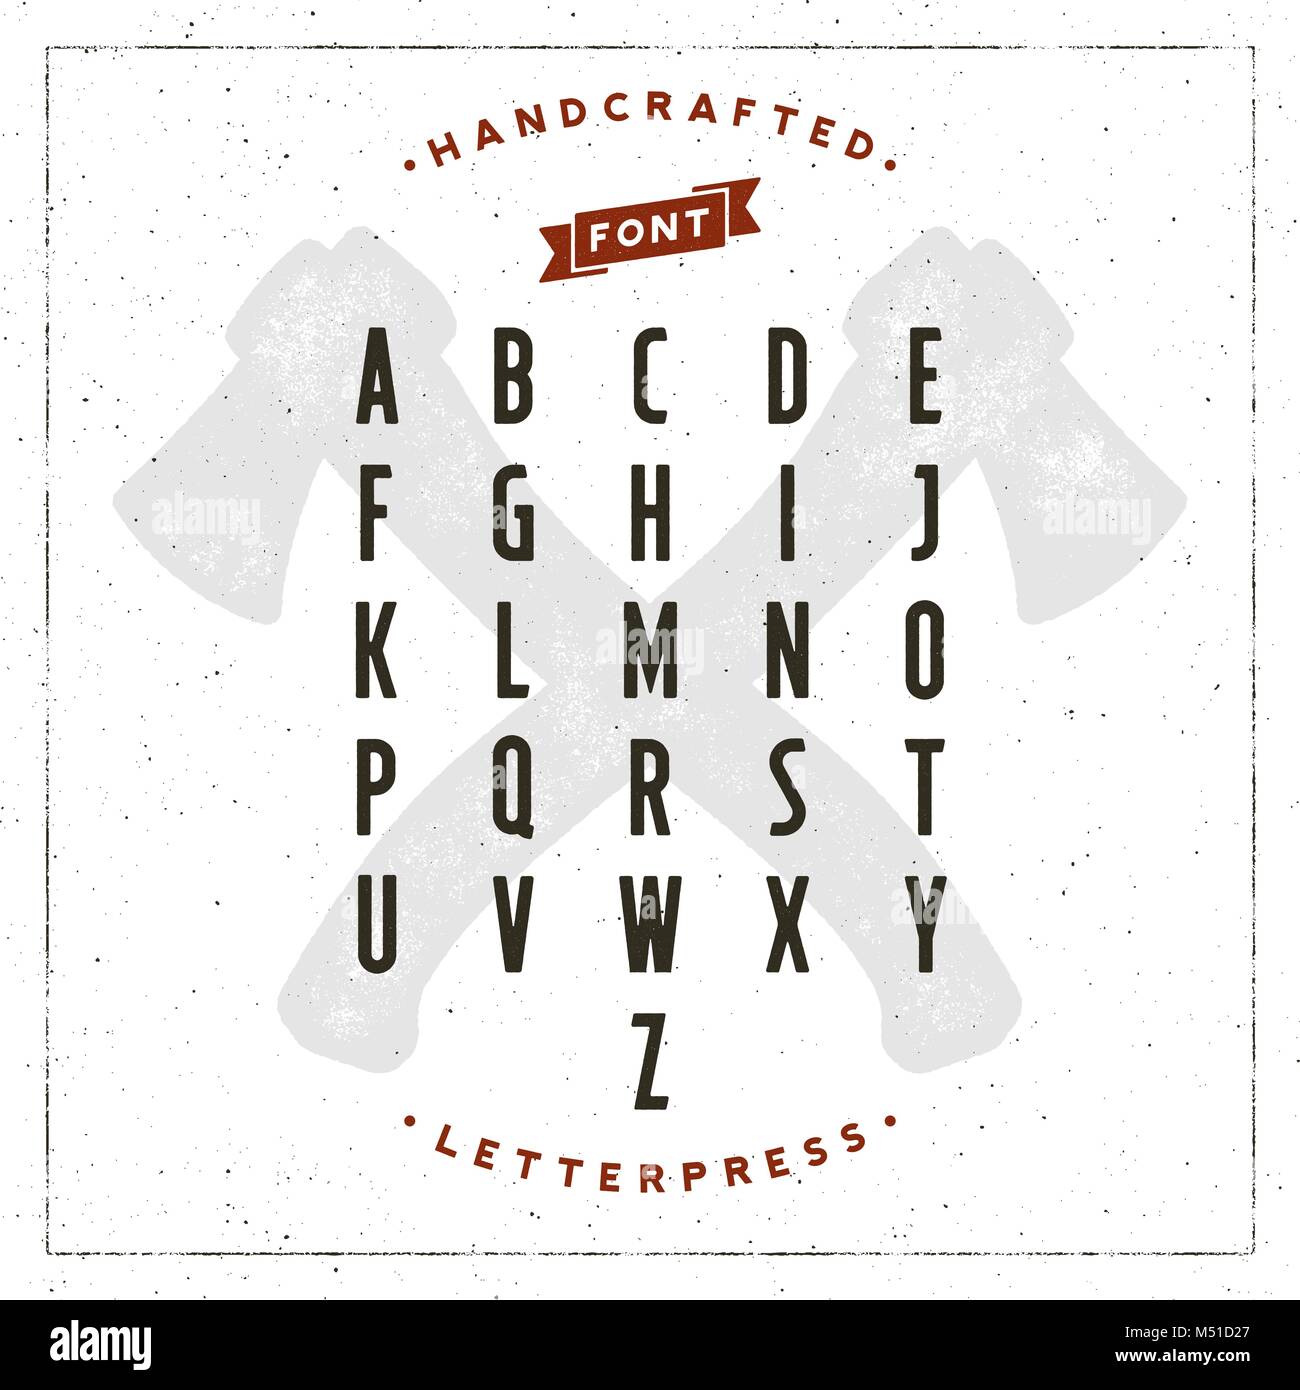 vintage retro handcrafted font with letterpress effect. vector illustration Stock Vector